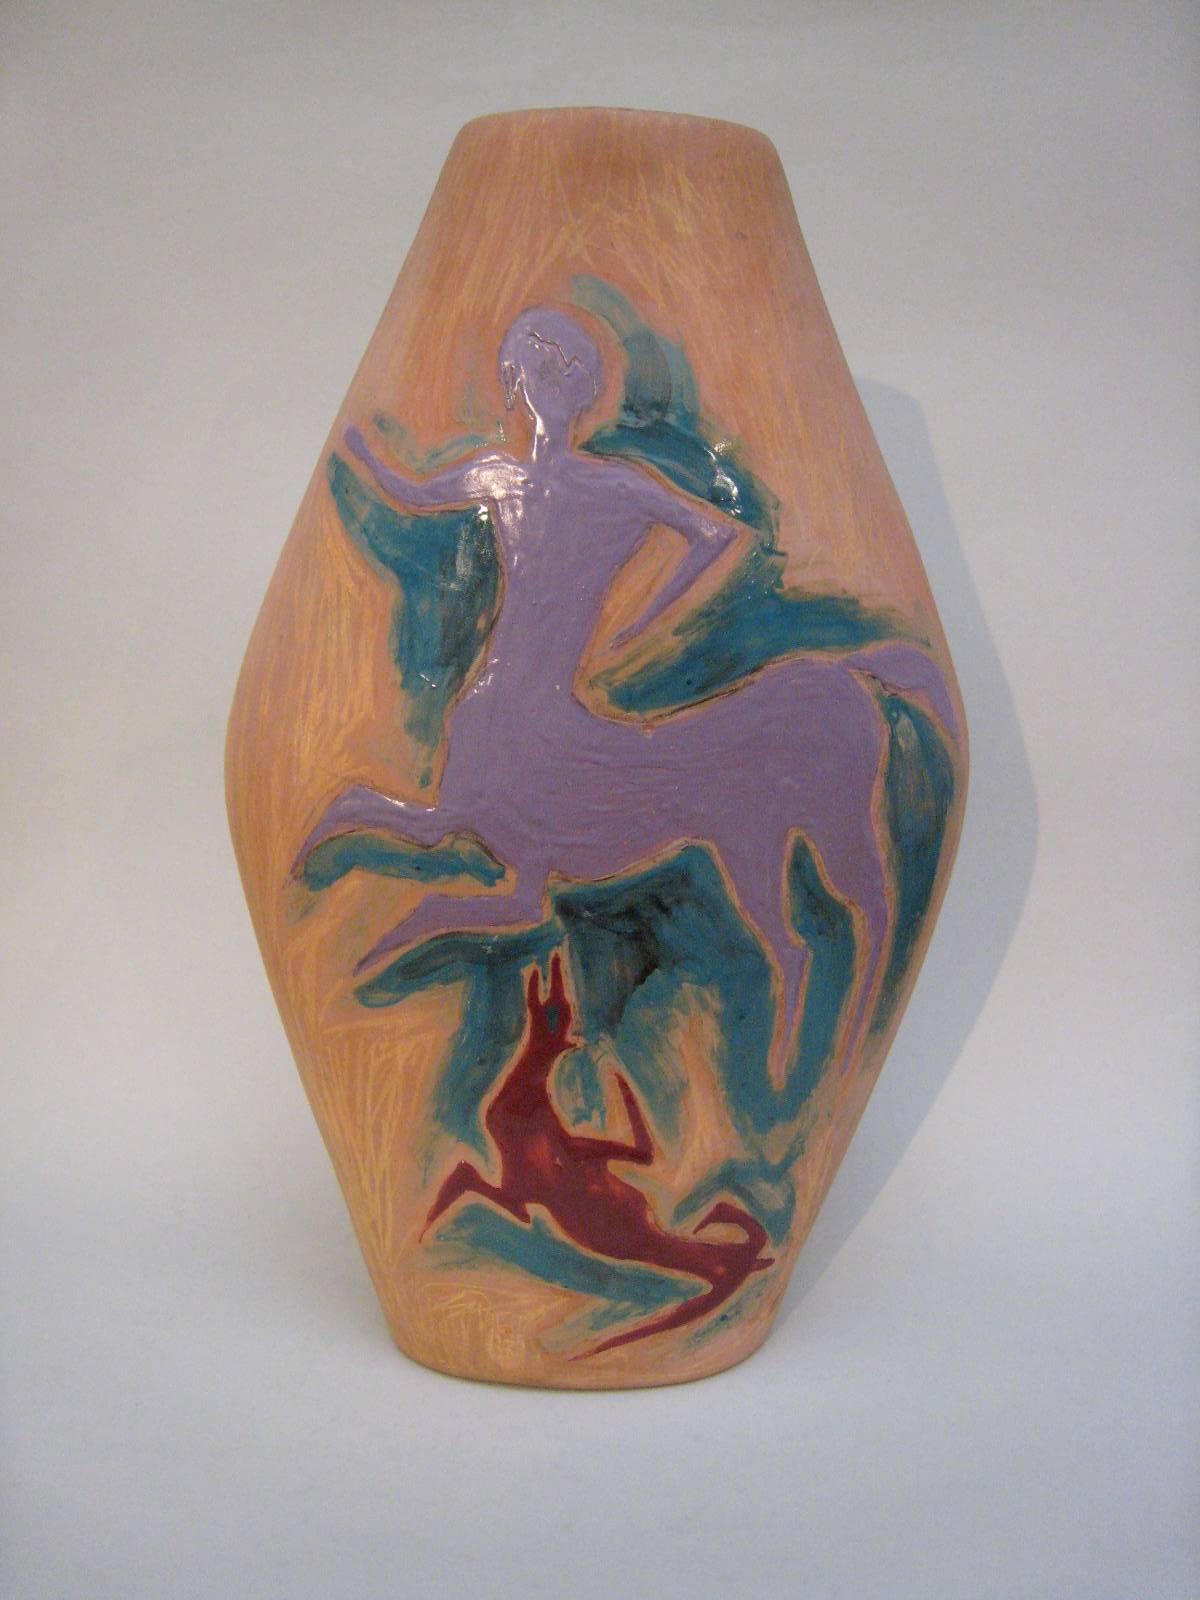 Italian Ceramic vase by Marcello Fantoni Signed and dated 1948.